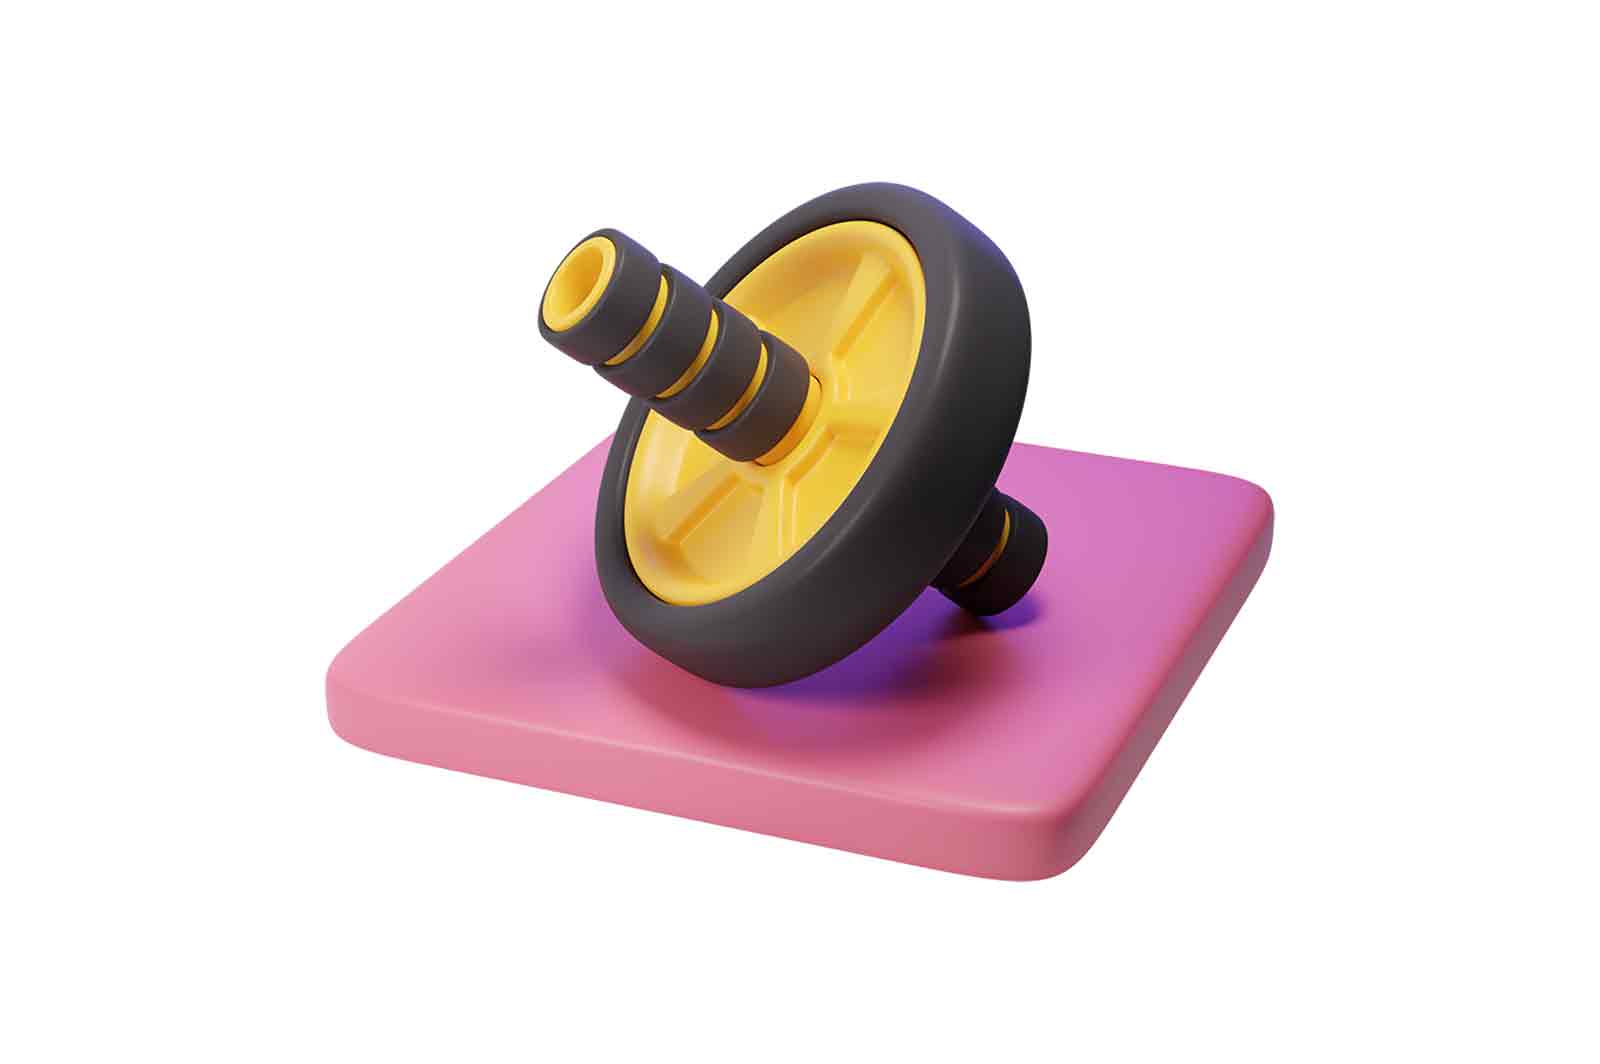 Fitness press roller for abs training 3d rendered illustration. Manual roller with handles. Equipment for abdominal muscles